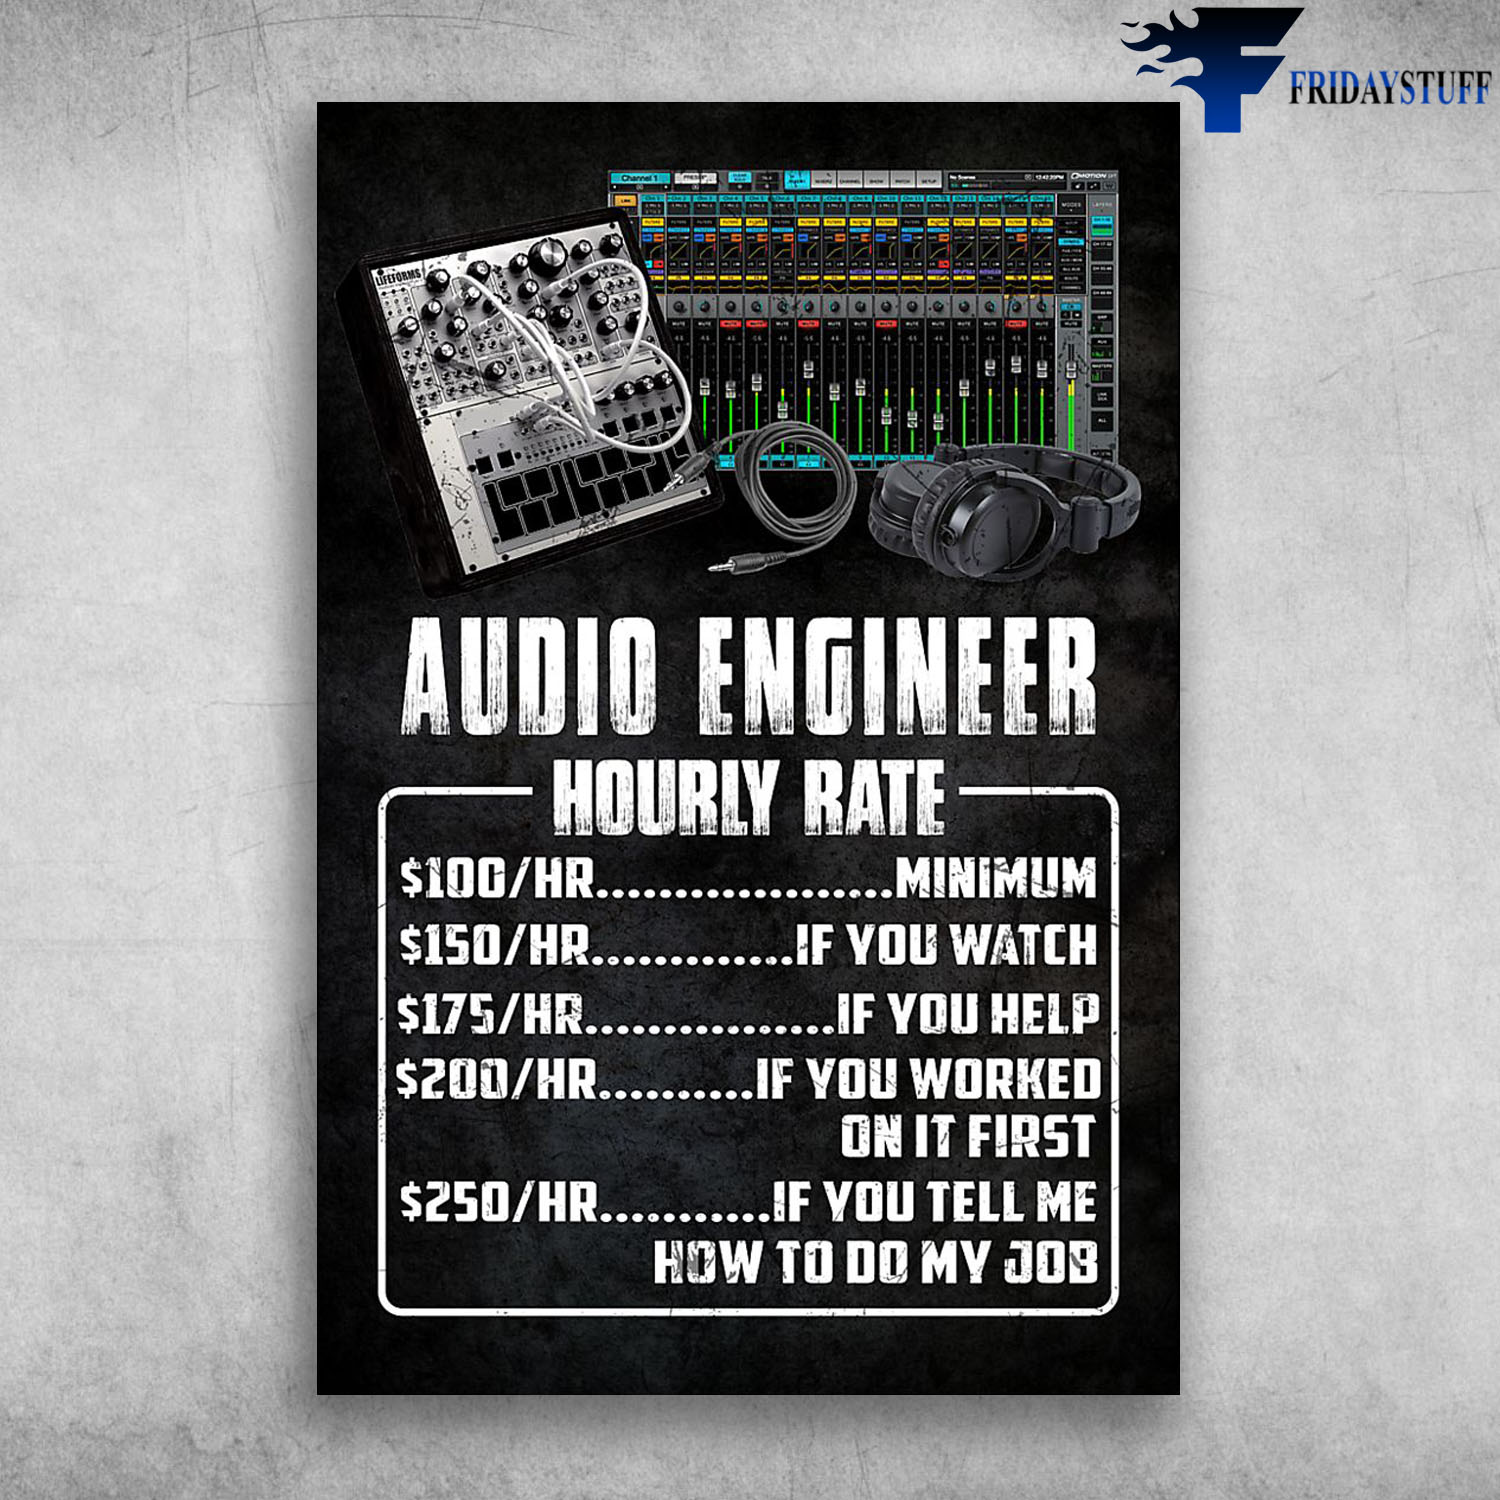 Audio Engineer Hourly Rate If You Worked On It First If You Tell Me How To Do My Job